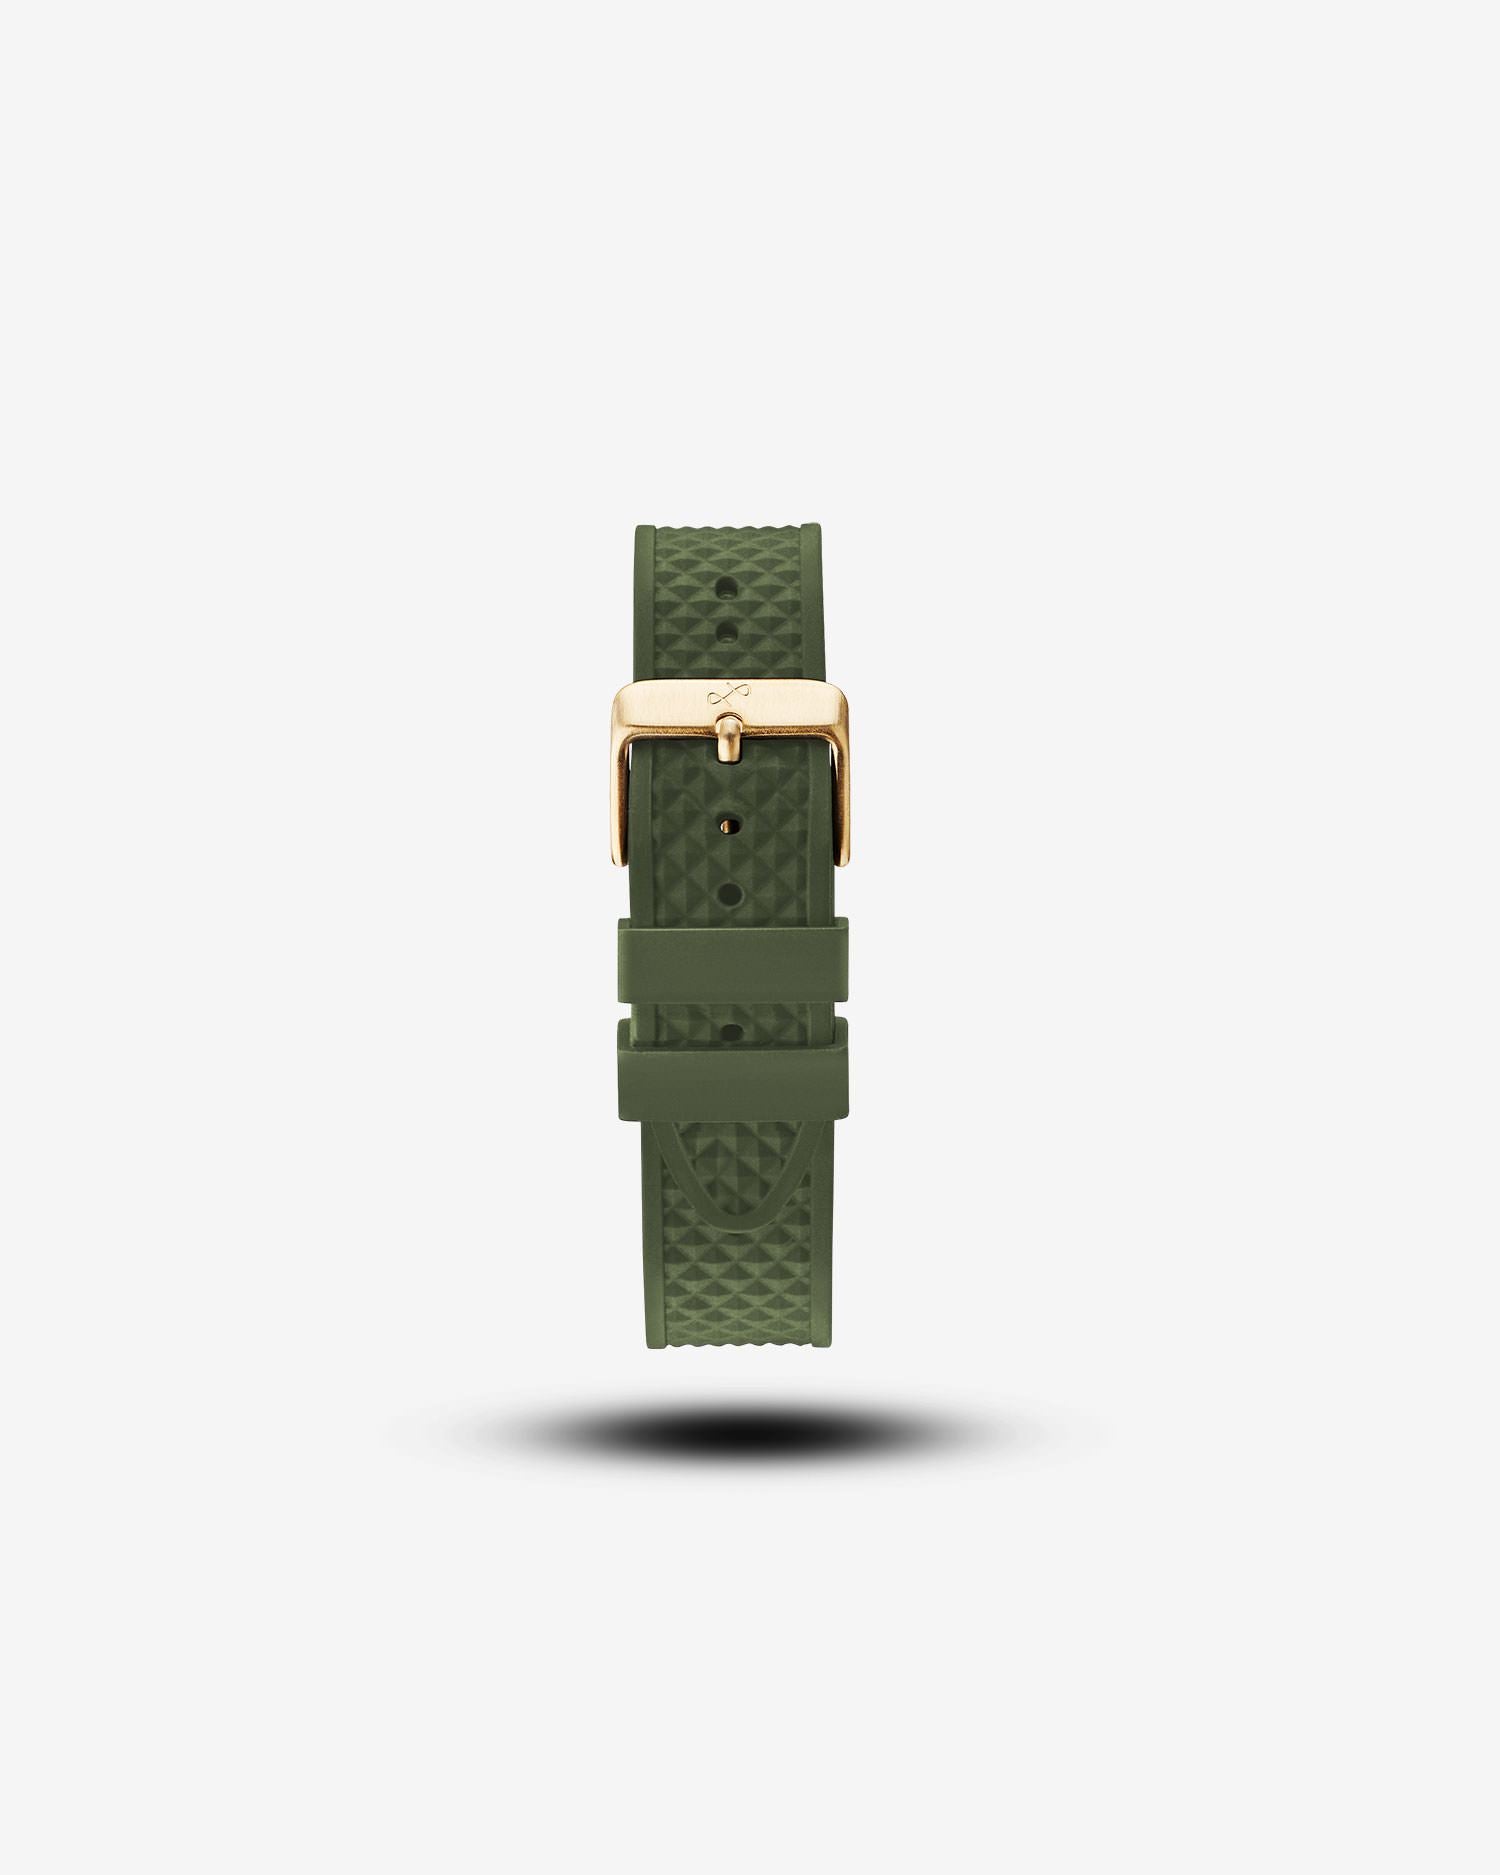 Pin Buckle - Green Silicone